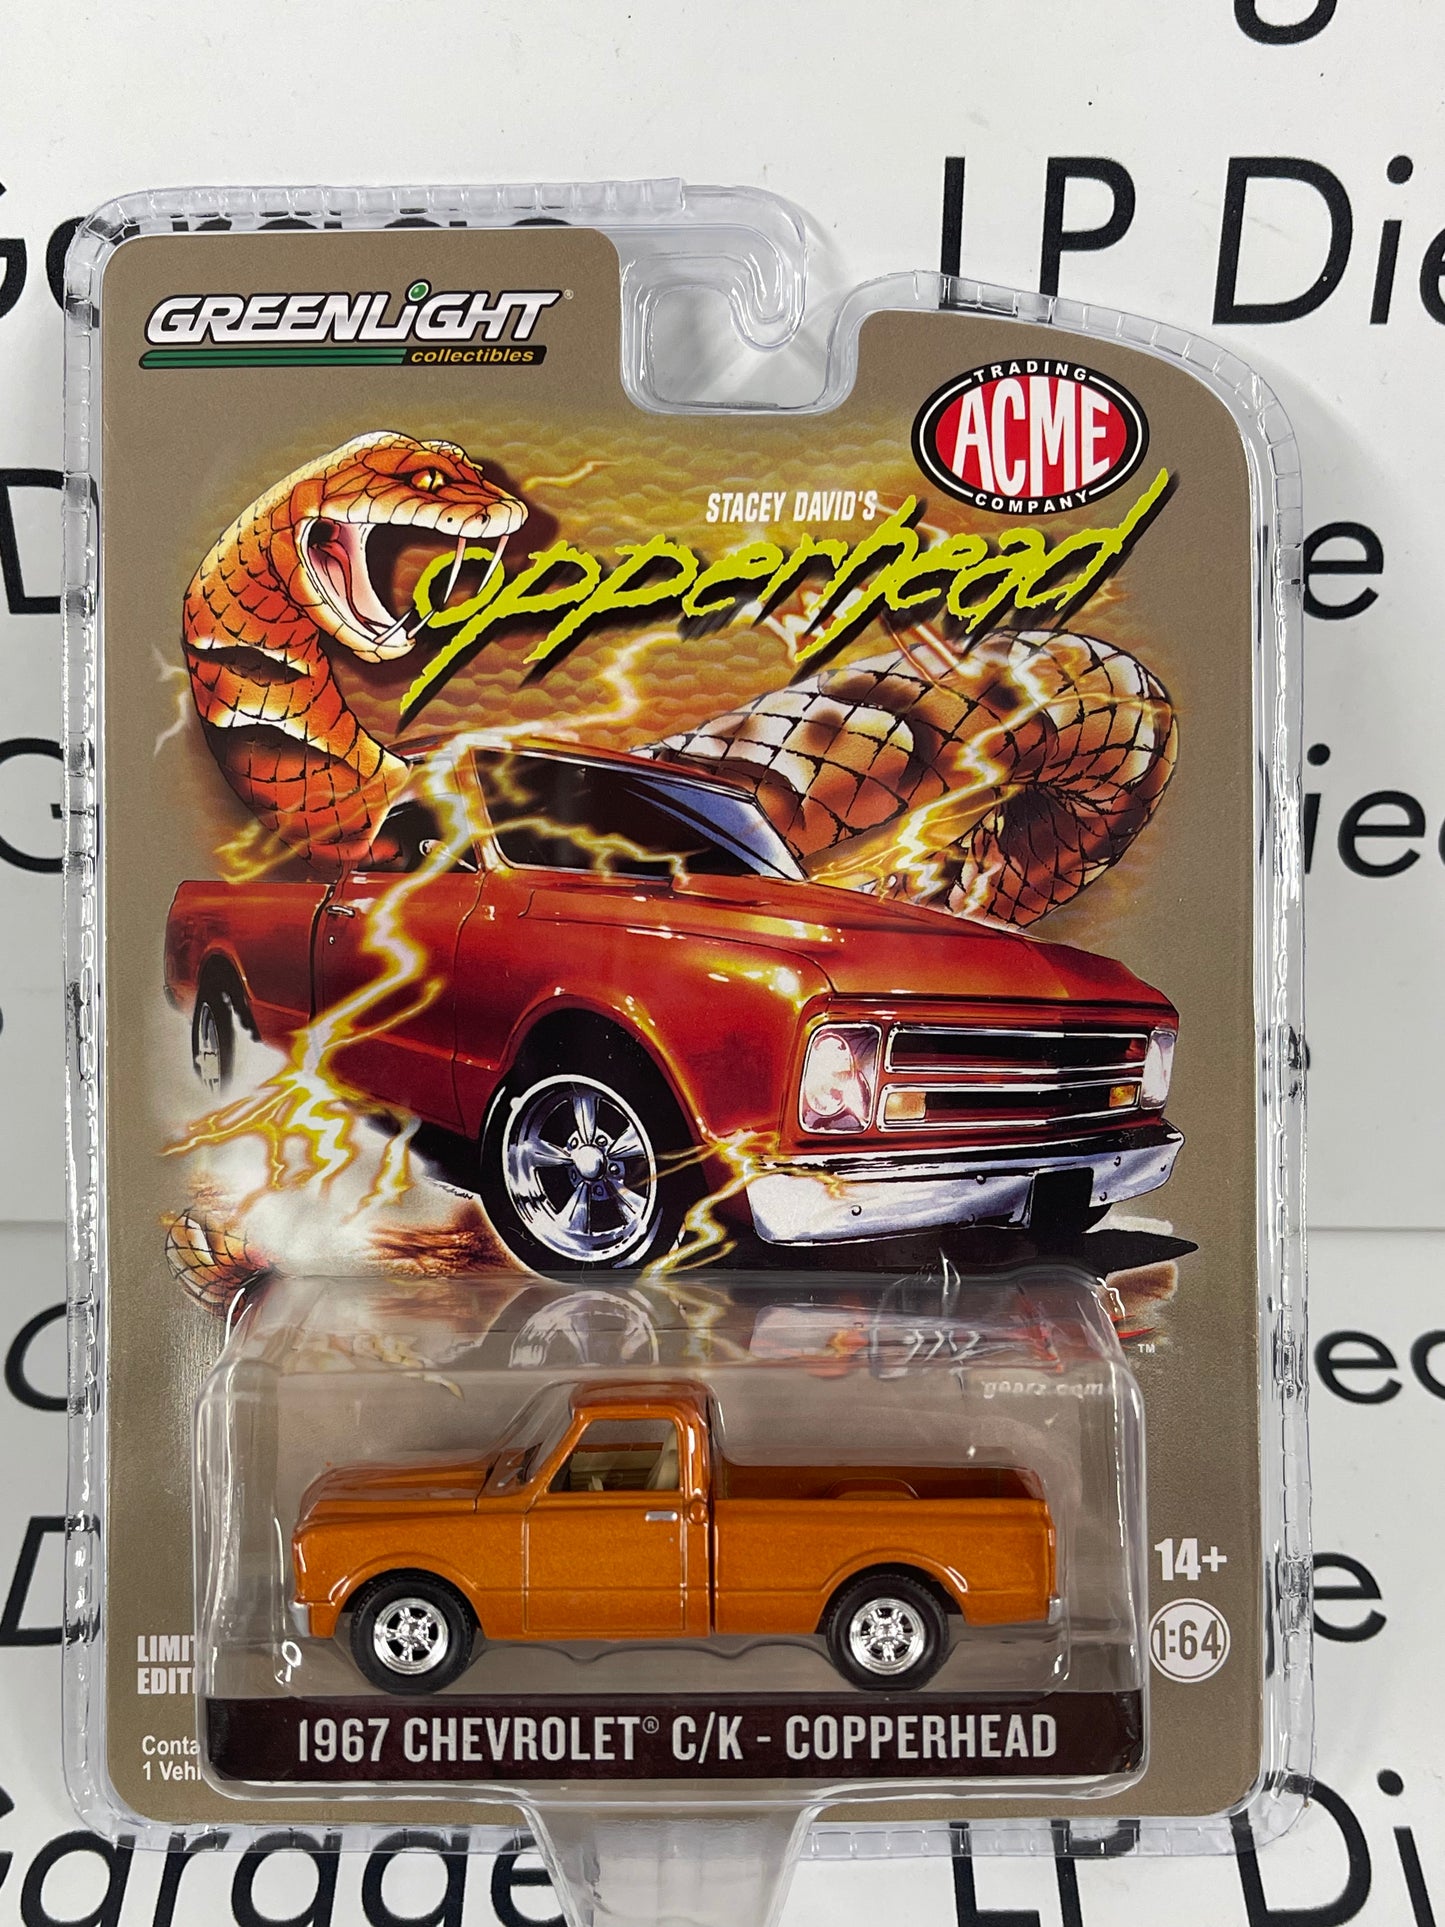 GREENLIGHT 1967 Chevrolet C/K Pick Up Truck Stacey David's Copperhead ACME Exclusive 1:64 Diecast